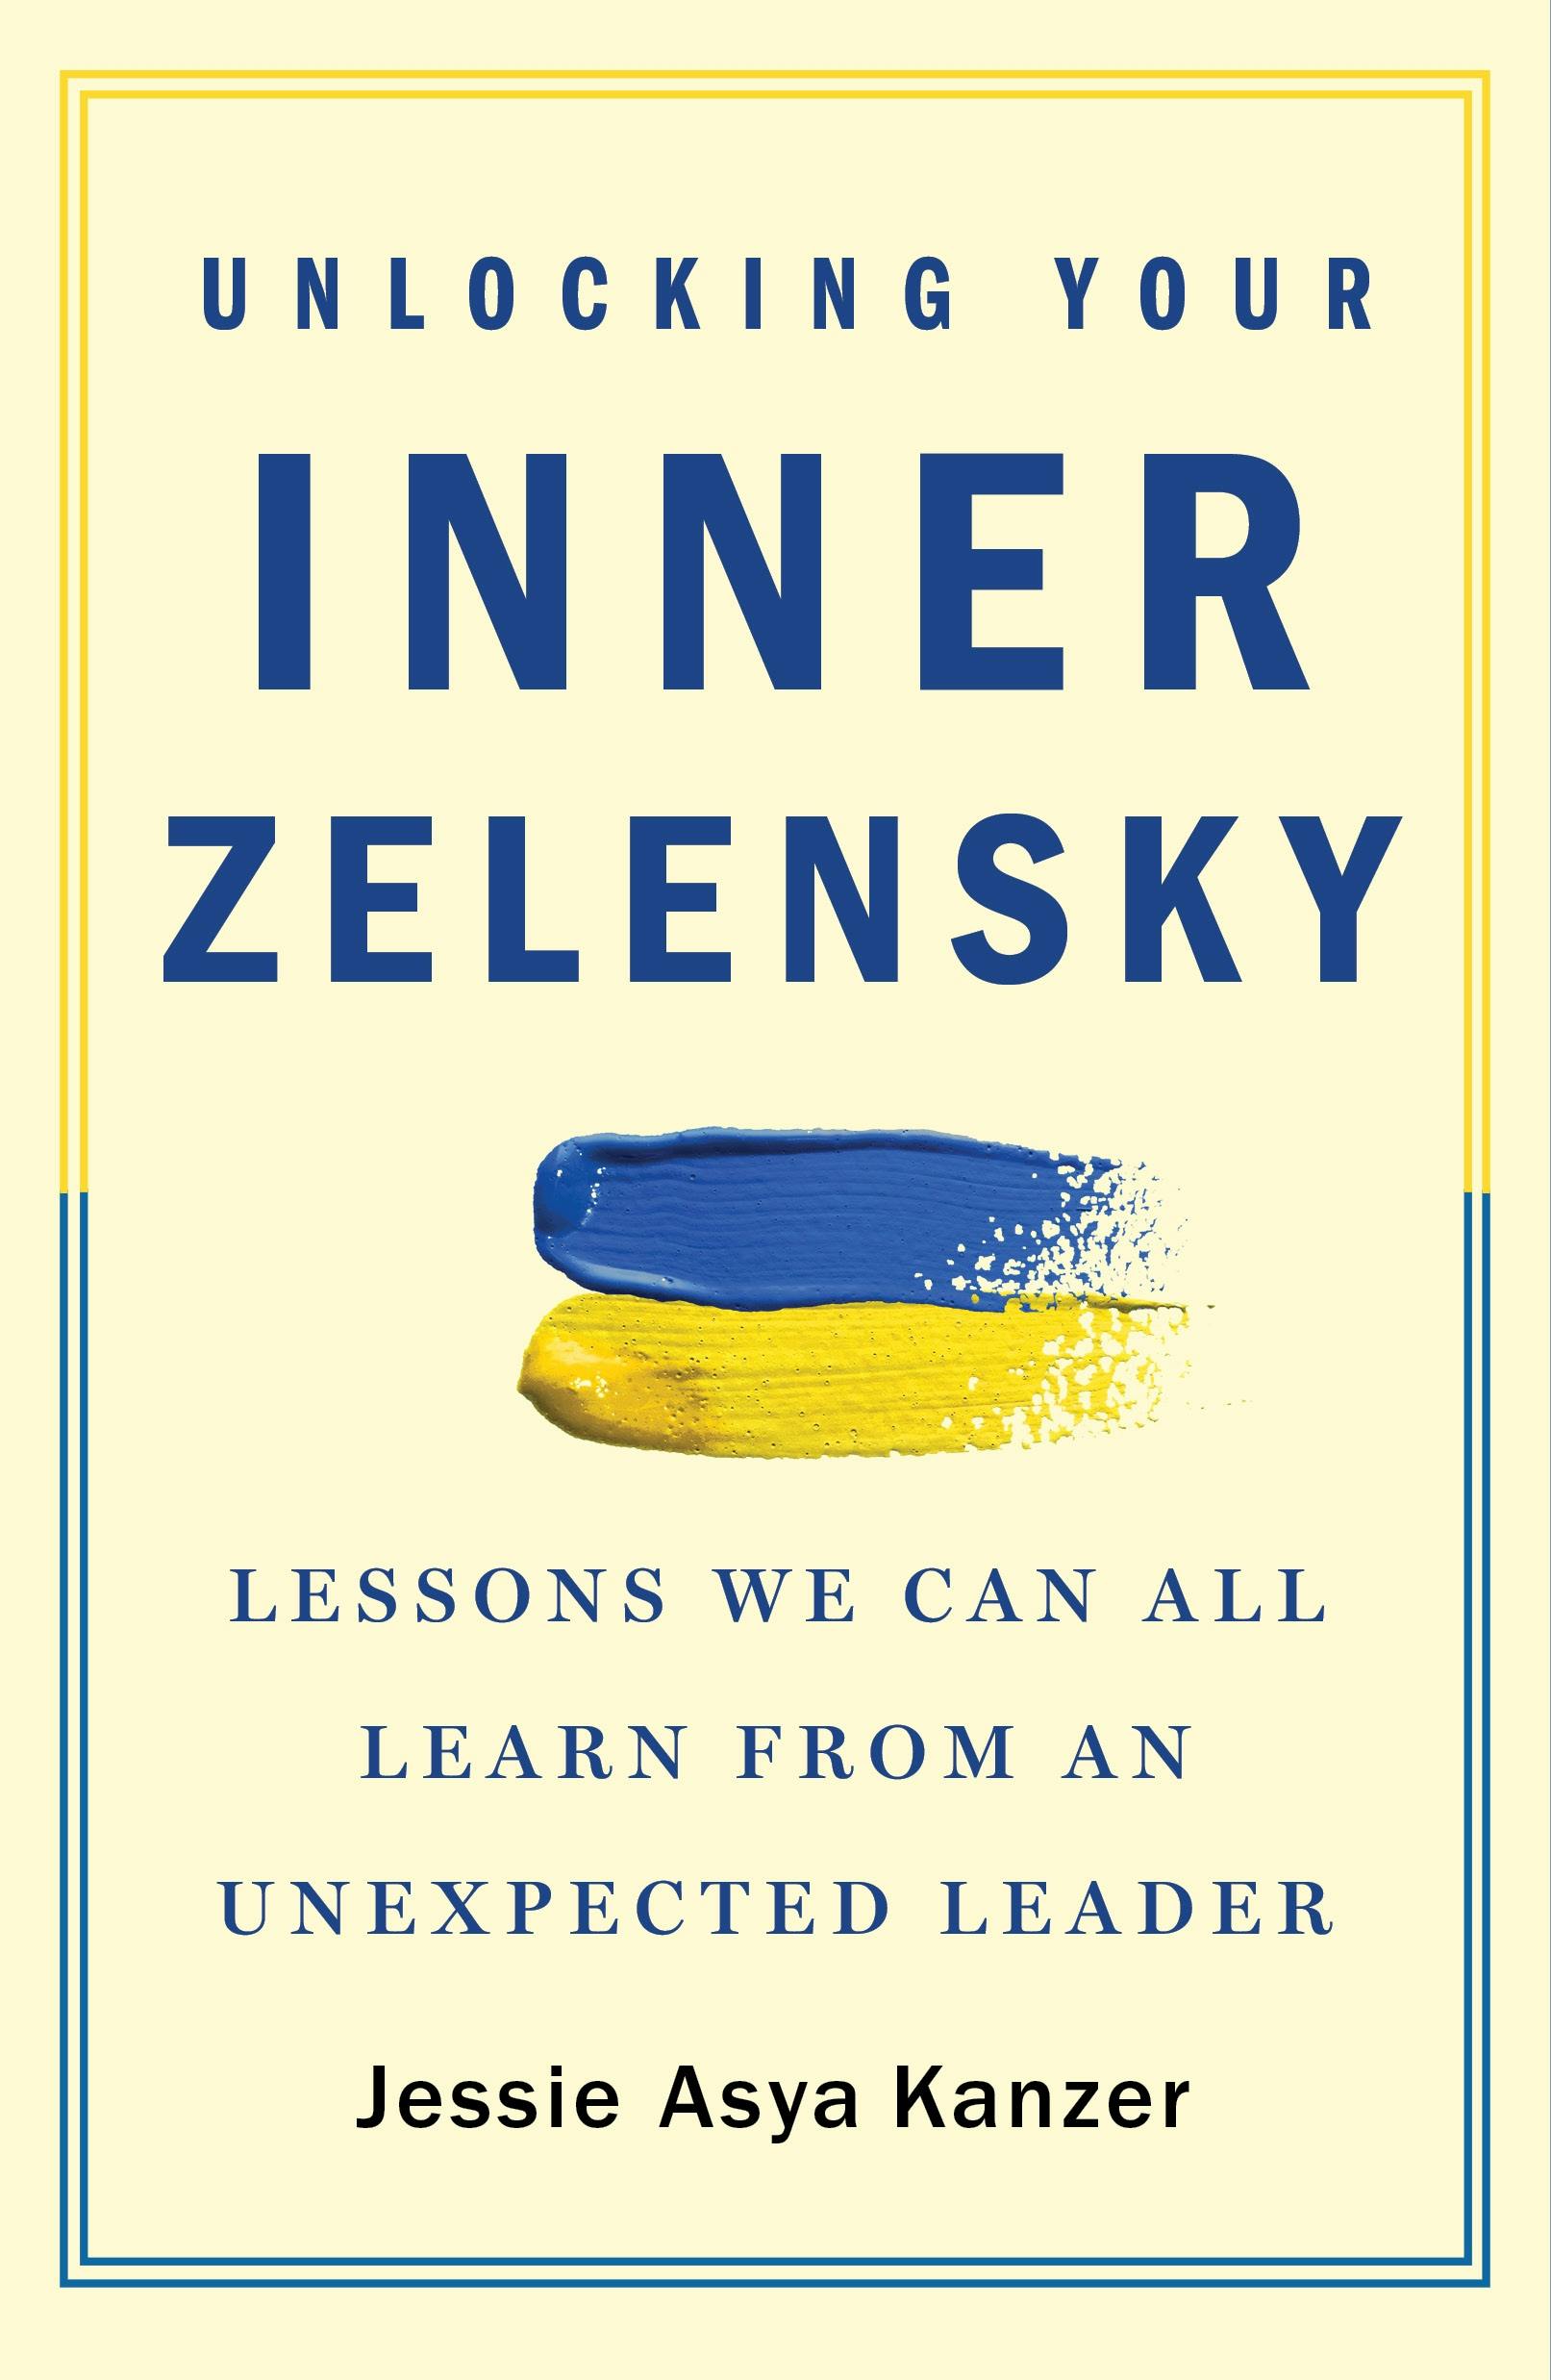 Describes for Unlocking Your Inner Zelensky by authors